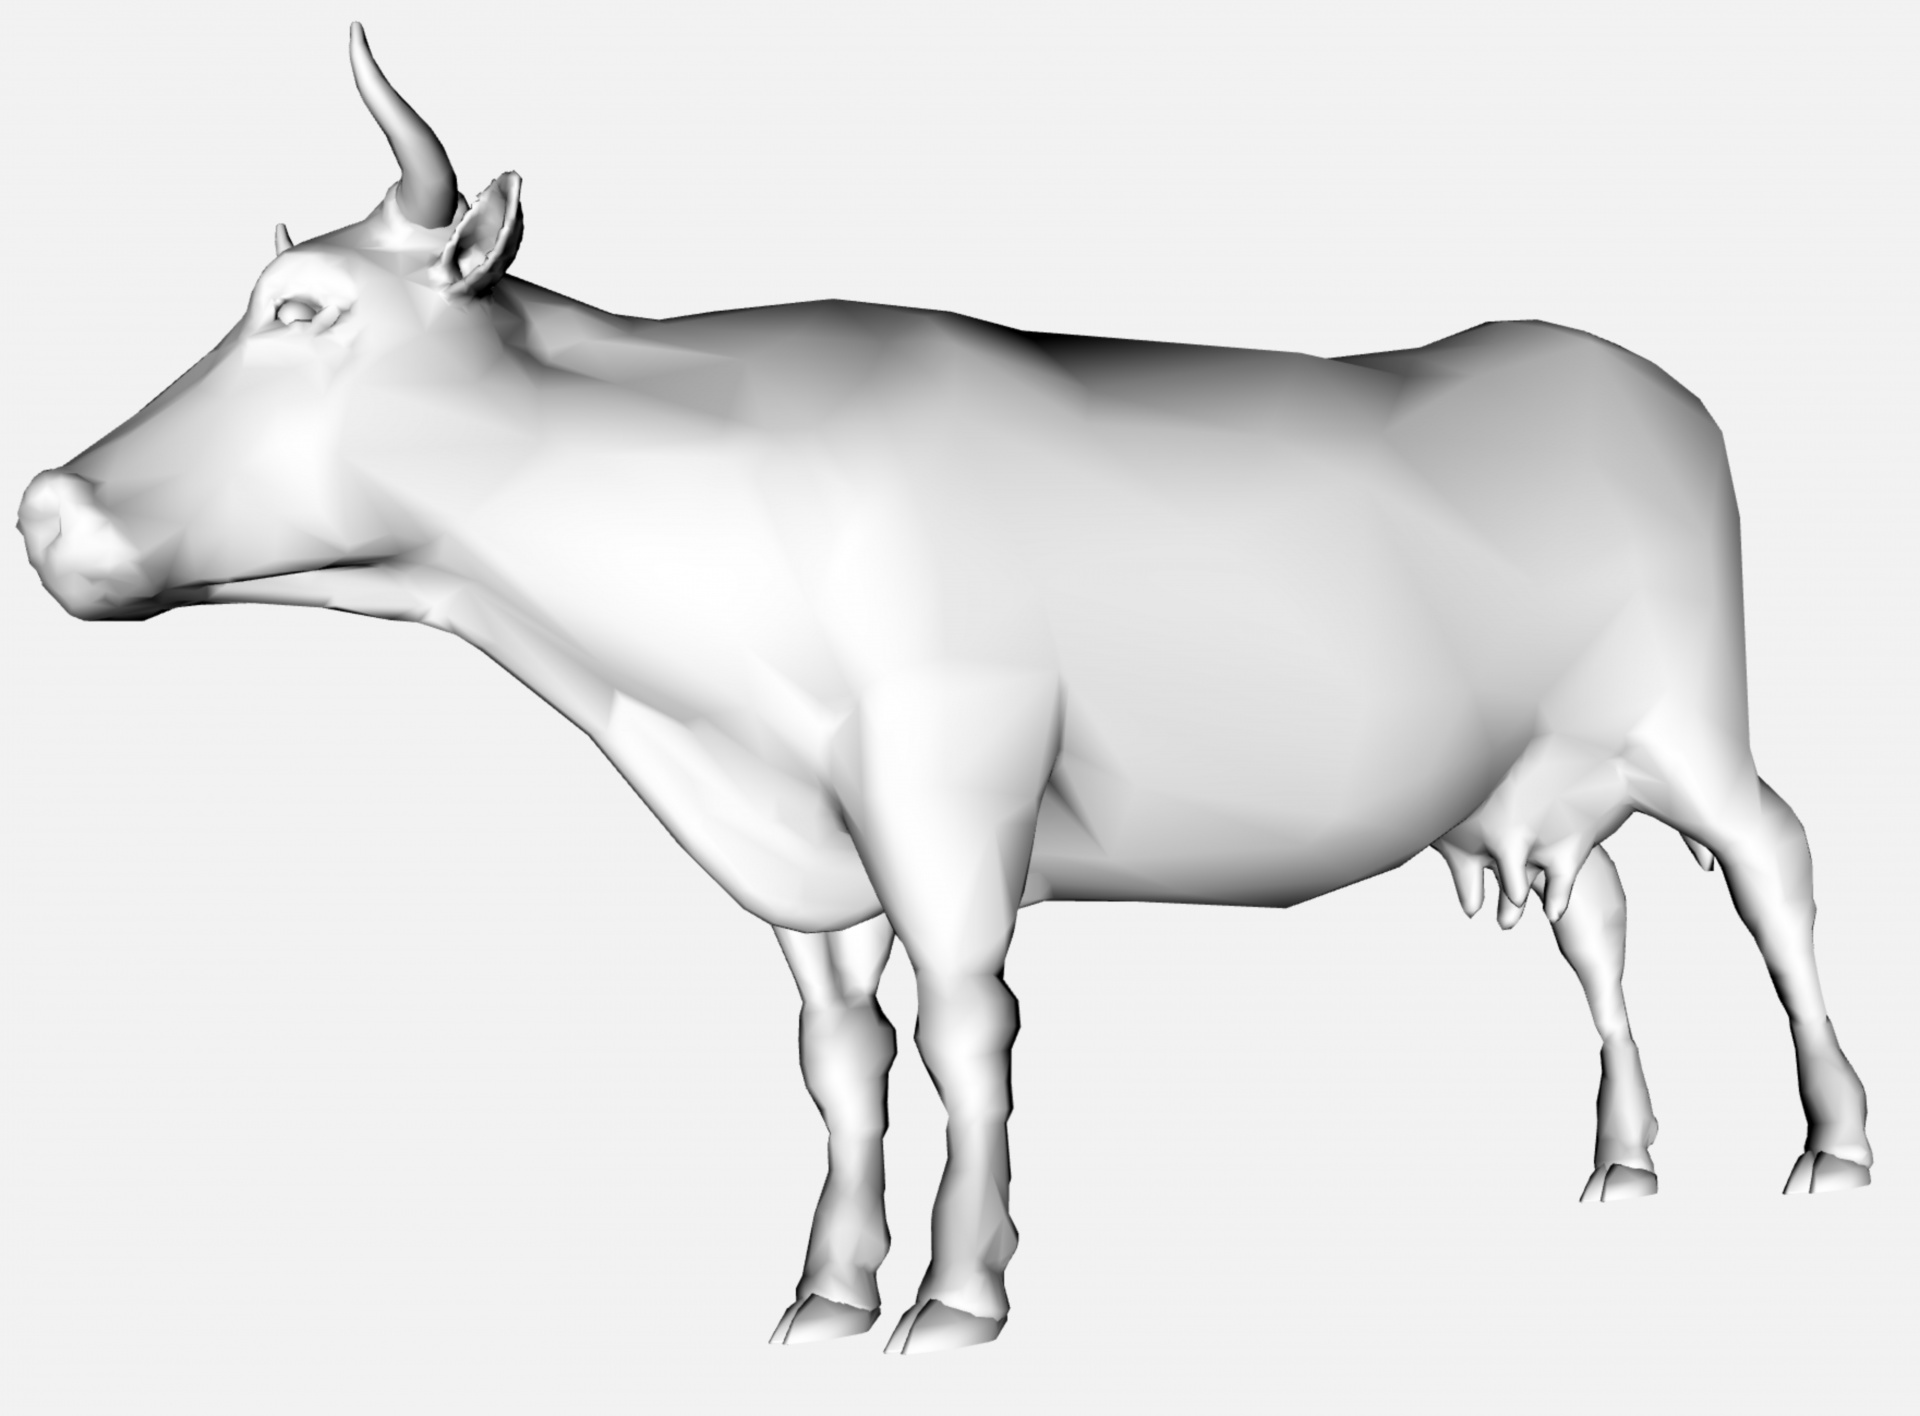 Grey Cow 3d Model Isolated Free Image From Needpix Com